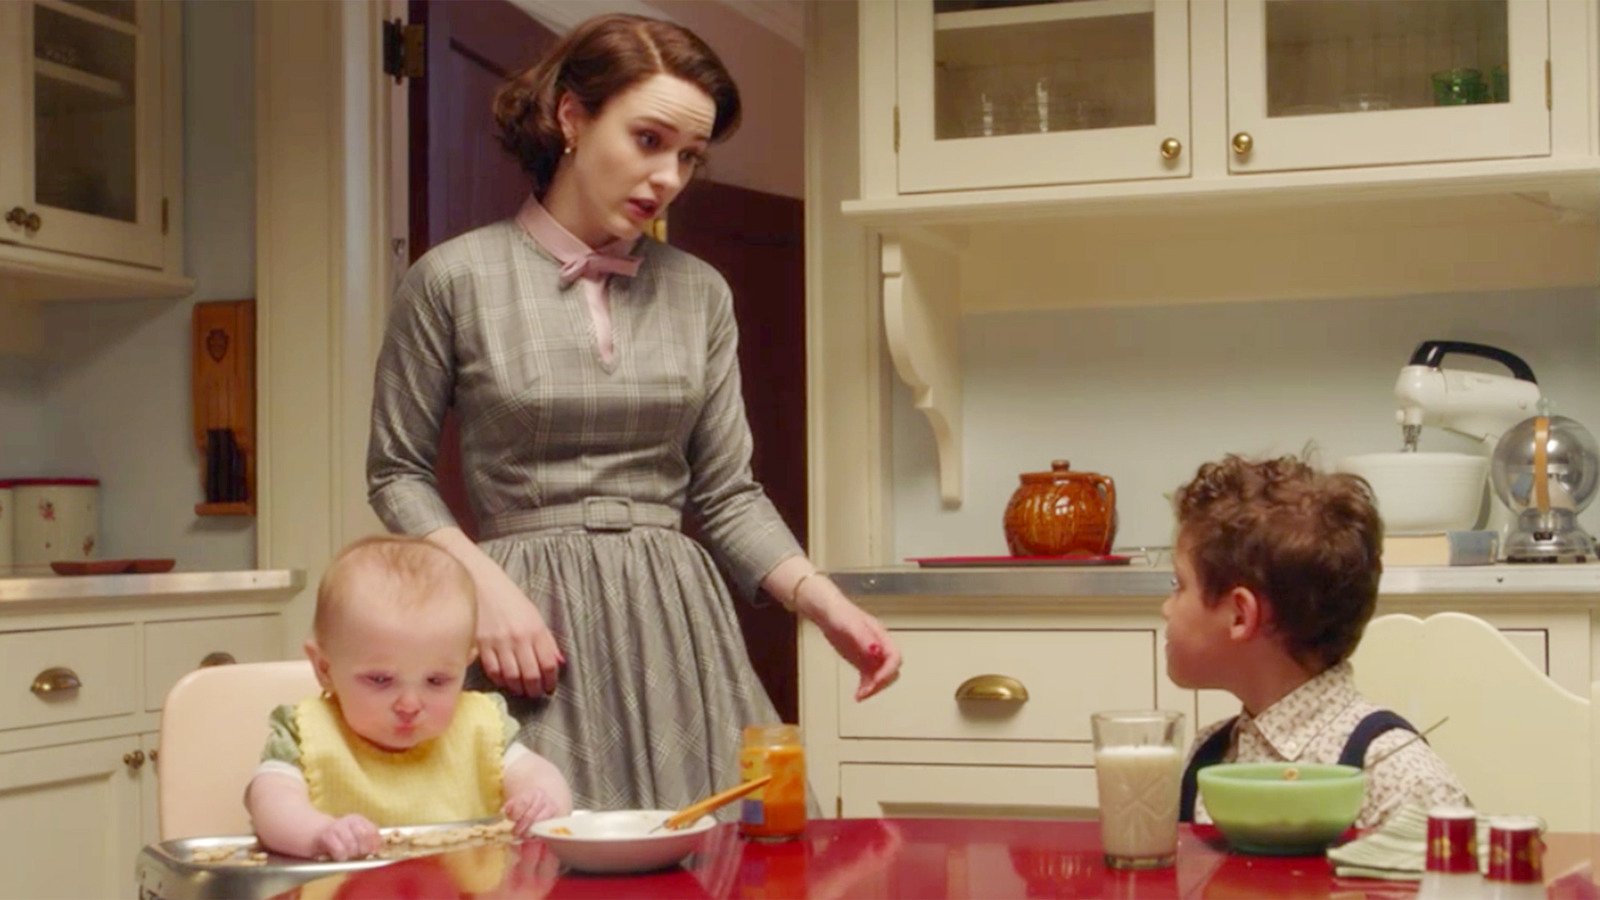 Rachel Brosnahan as Miriam "Midge" Maisel with baby Esther and older son Ethan in a scene from Amazon's 'The Marvelous Mrs. Maisel.' The kids are seated at the kitchen table as Midge stands talking to Ethan. She is a white woman with bobbed reddish-brownish hair and wearing a grey, belted, 1950's style dress with a pink collar and bow at her neck. 